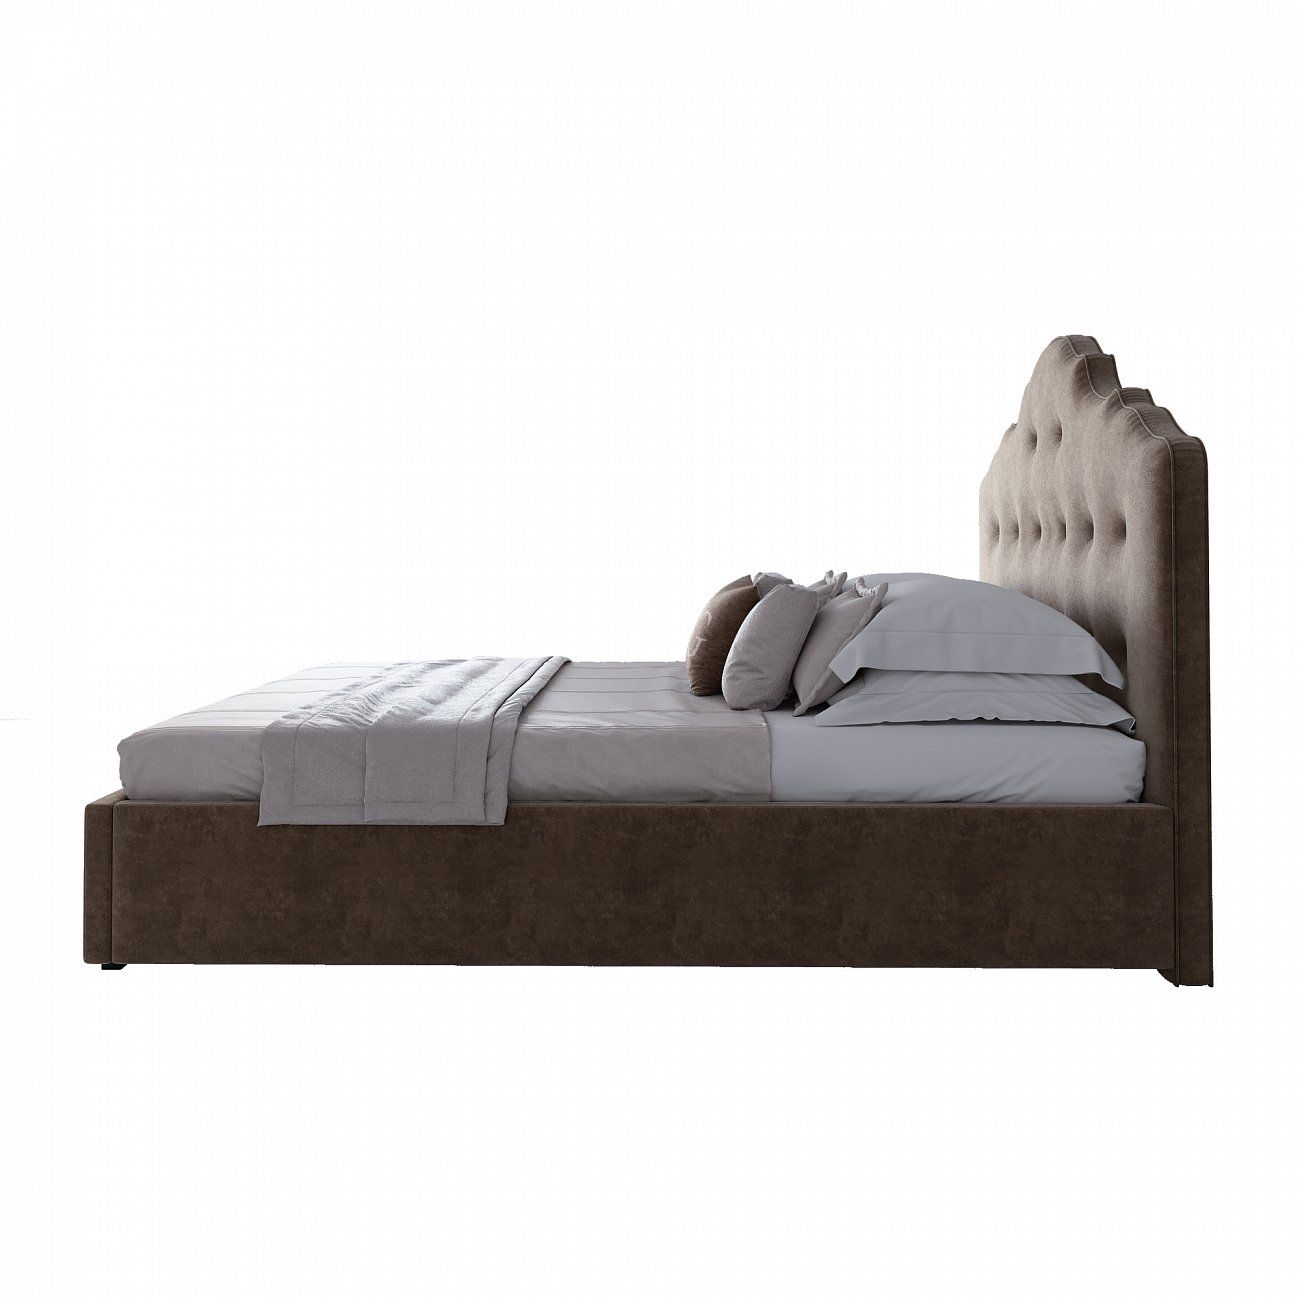 Double bed 160x200 cm brown Palace